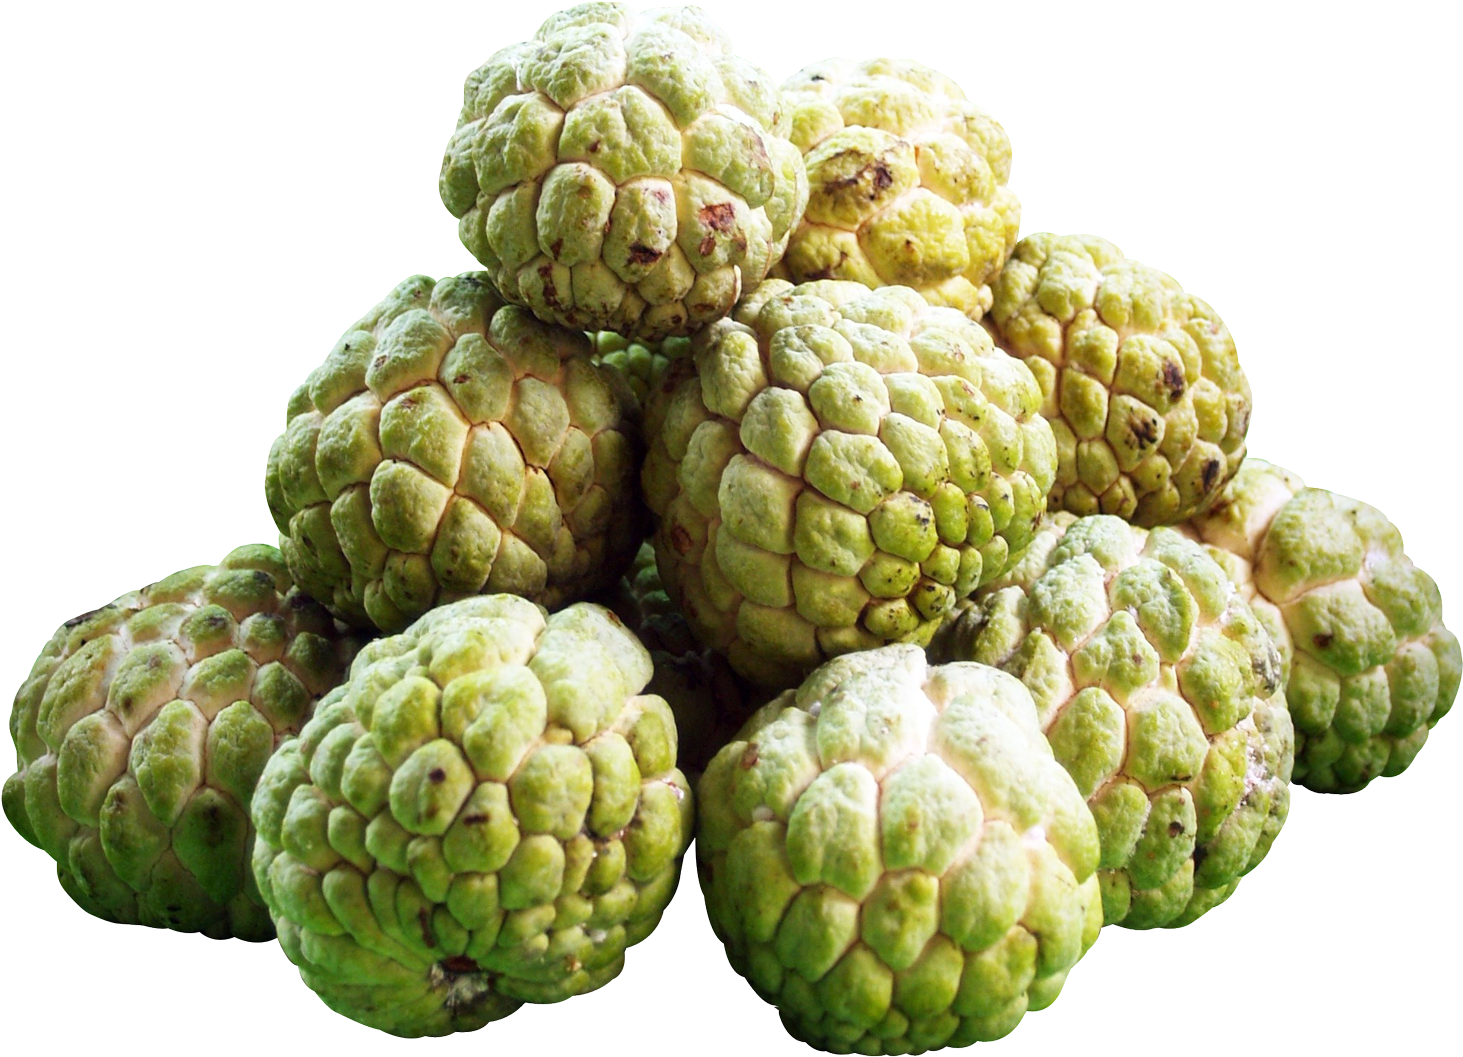 A Pile Of Green Fruit